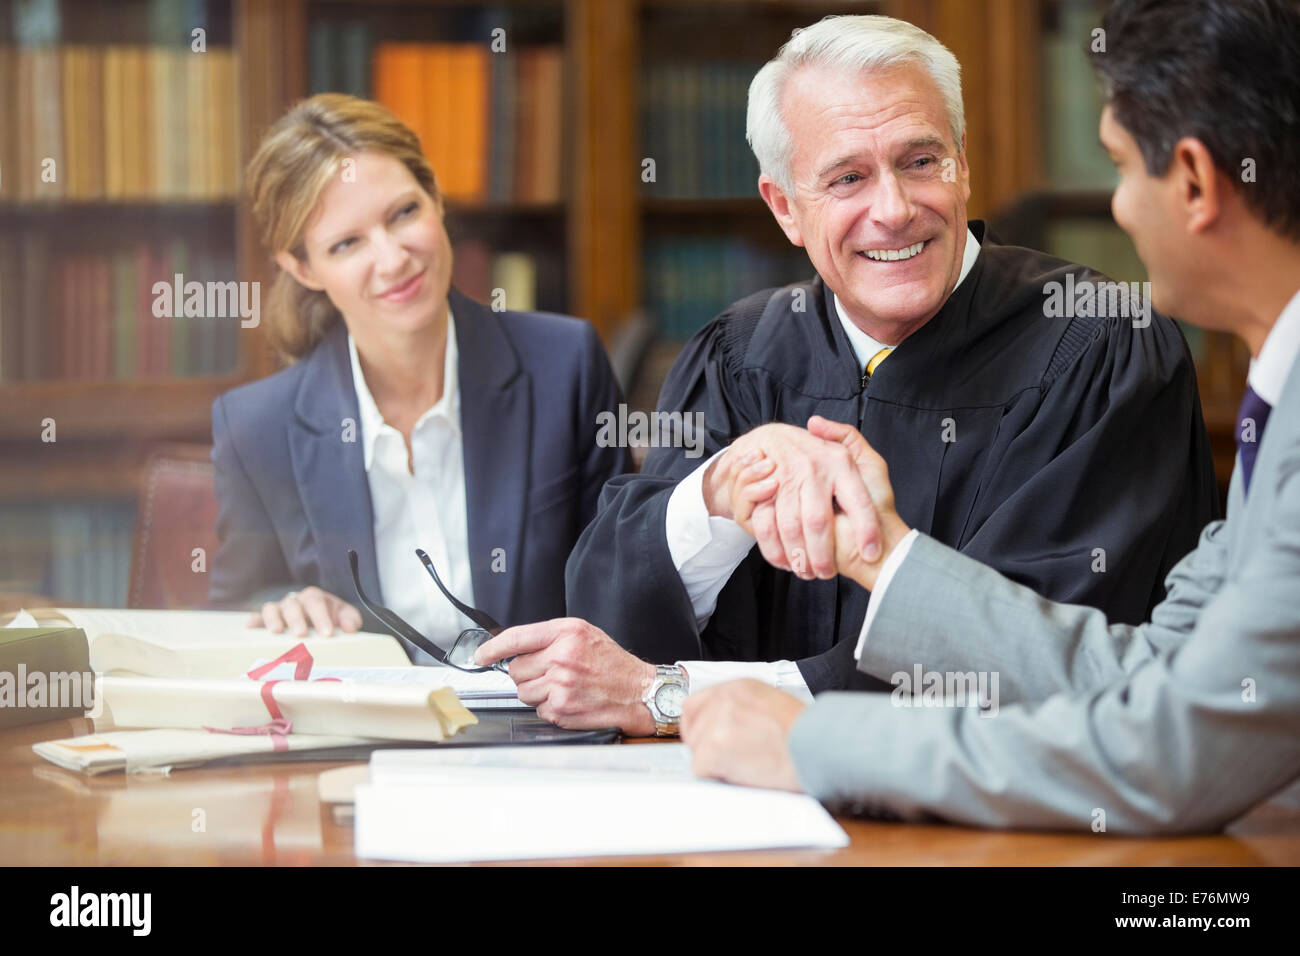 Juge et avocat shaking hands in chambers Banque D'Images